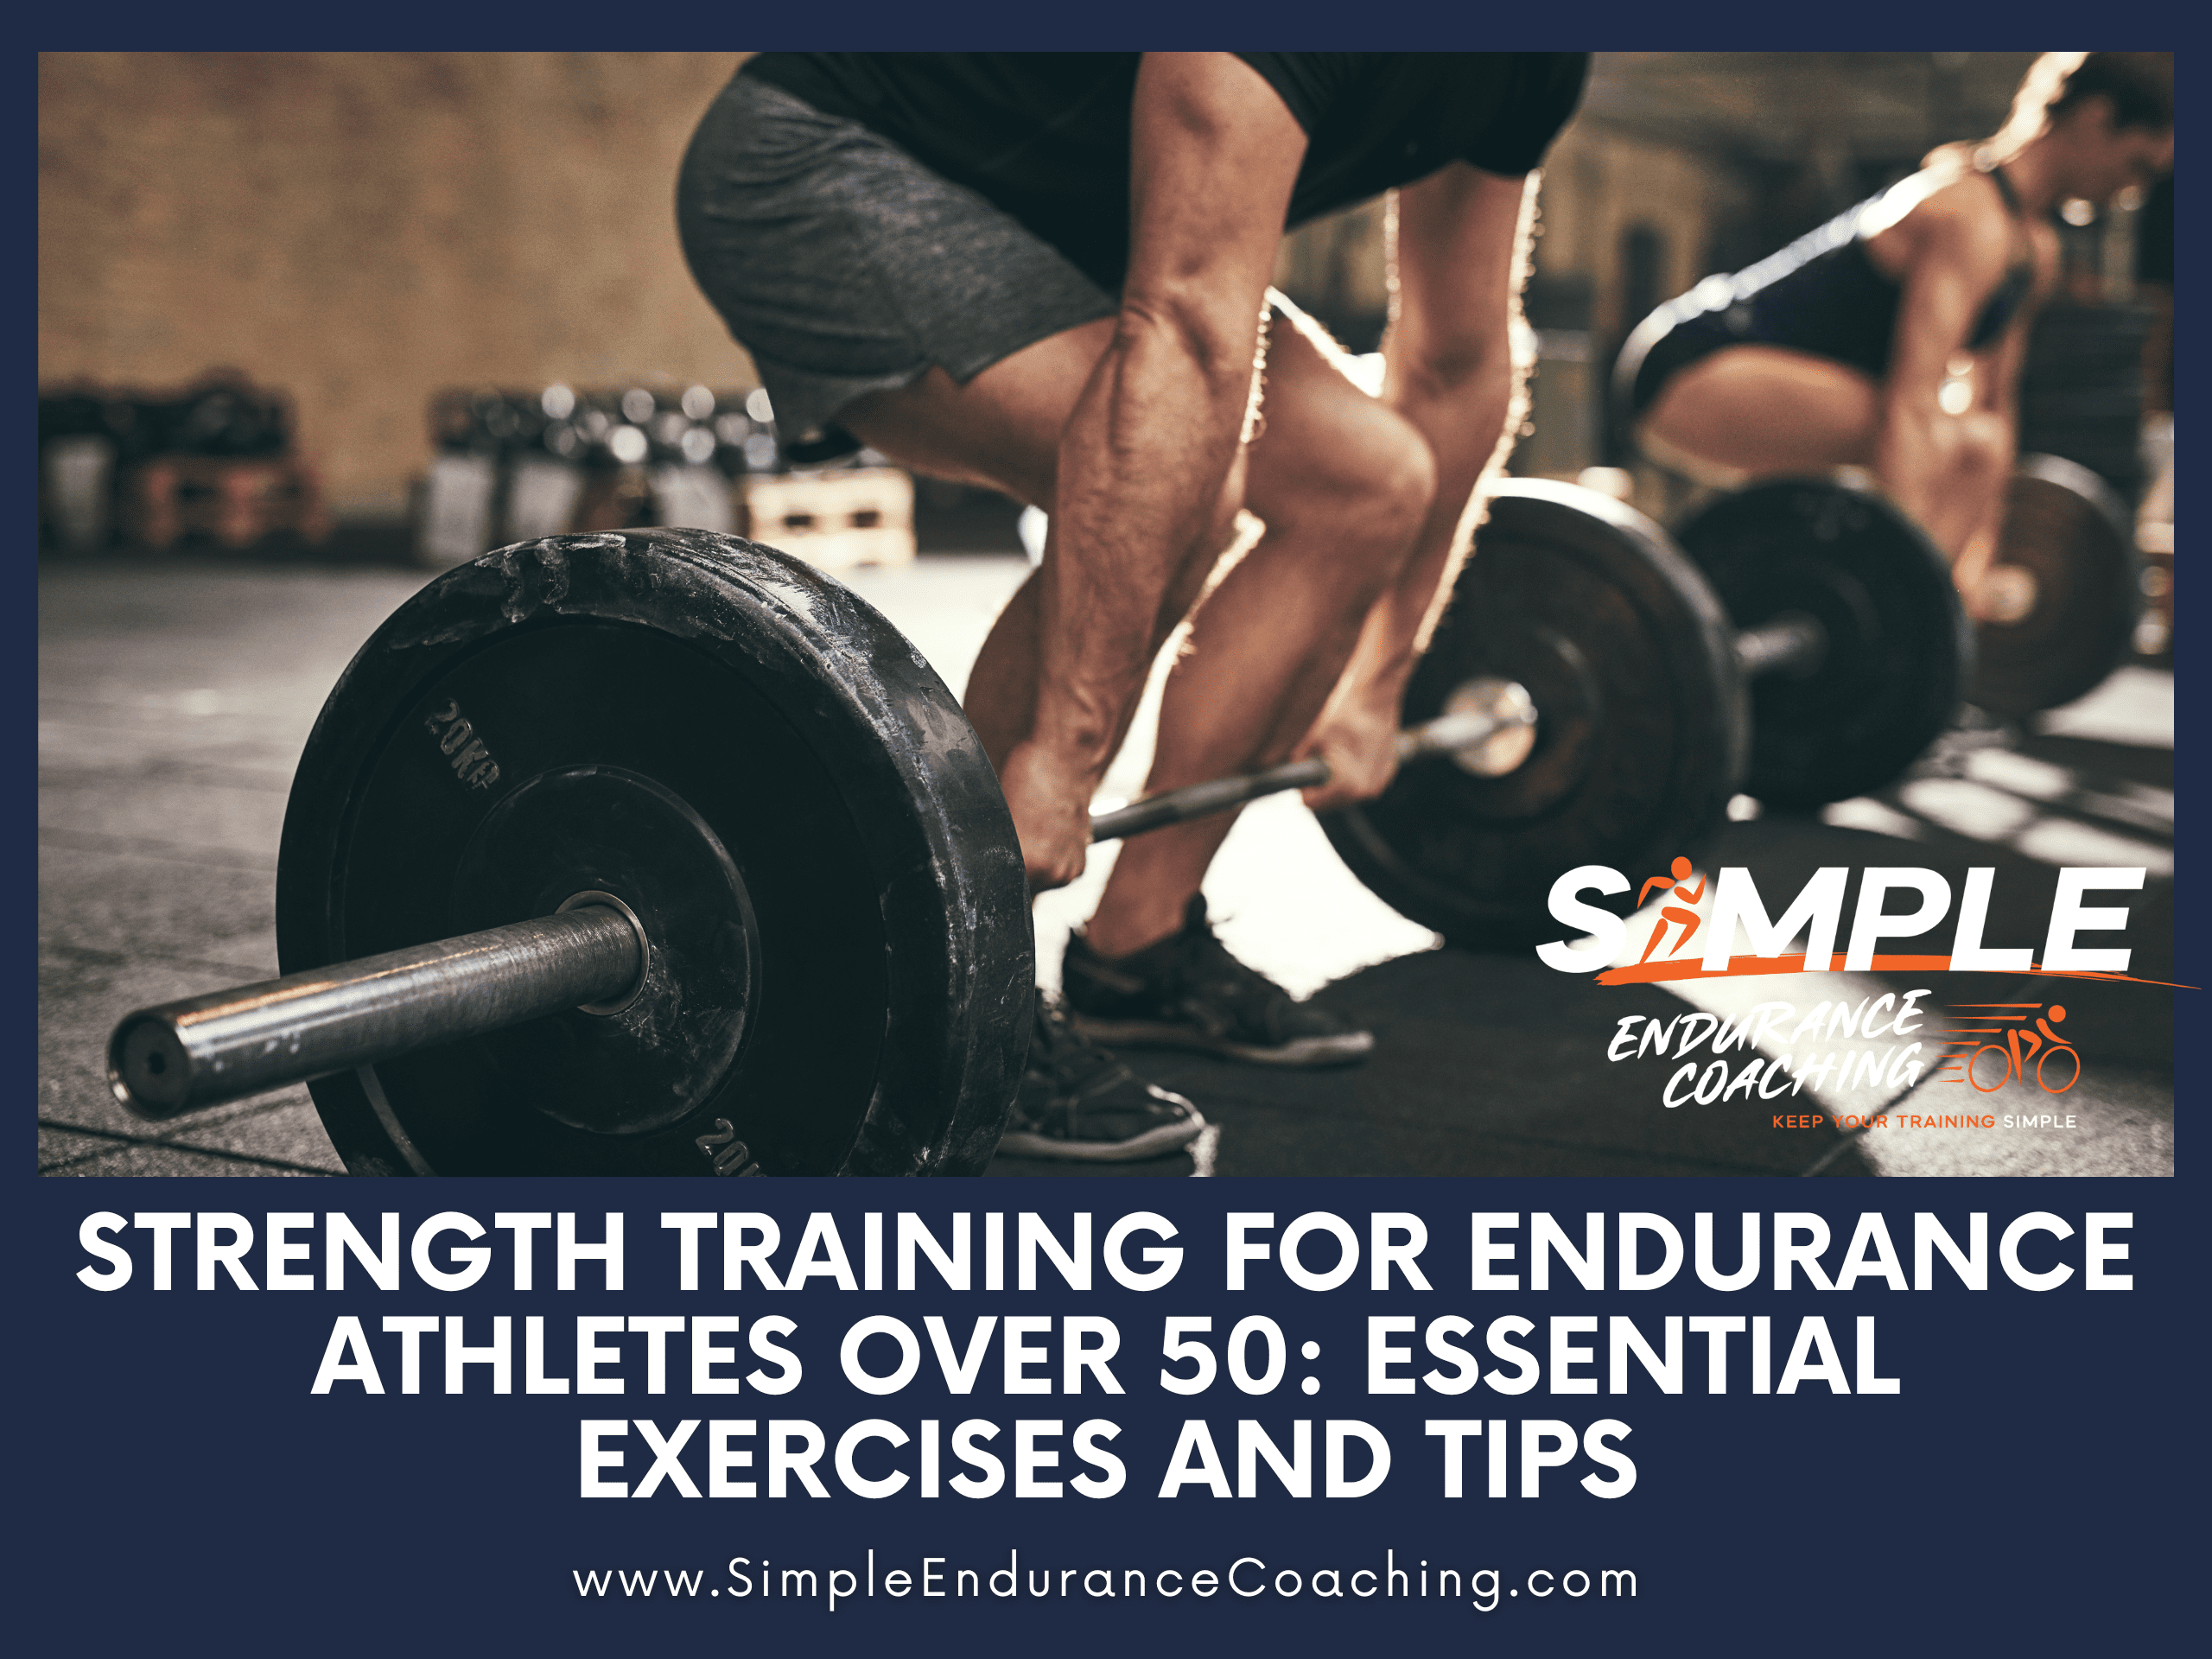 Explore effective strength training exercises and tips for endurance athletes over 50. Enhance muscle, bone health, and performance safely.